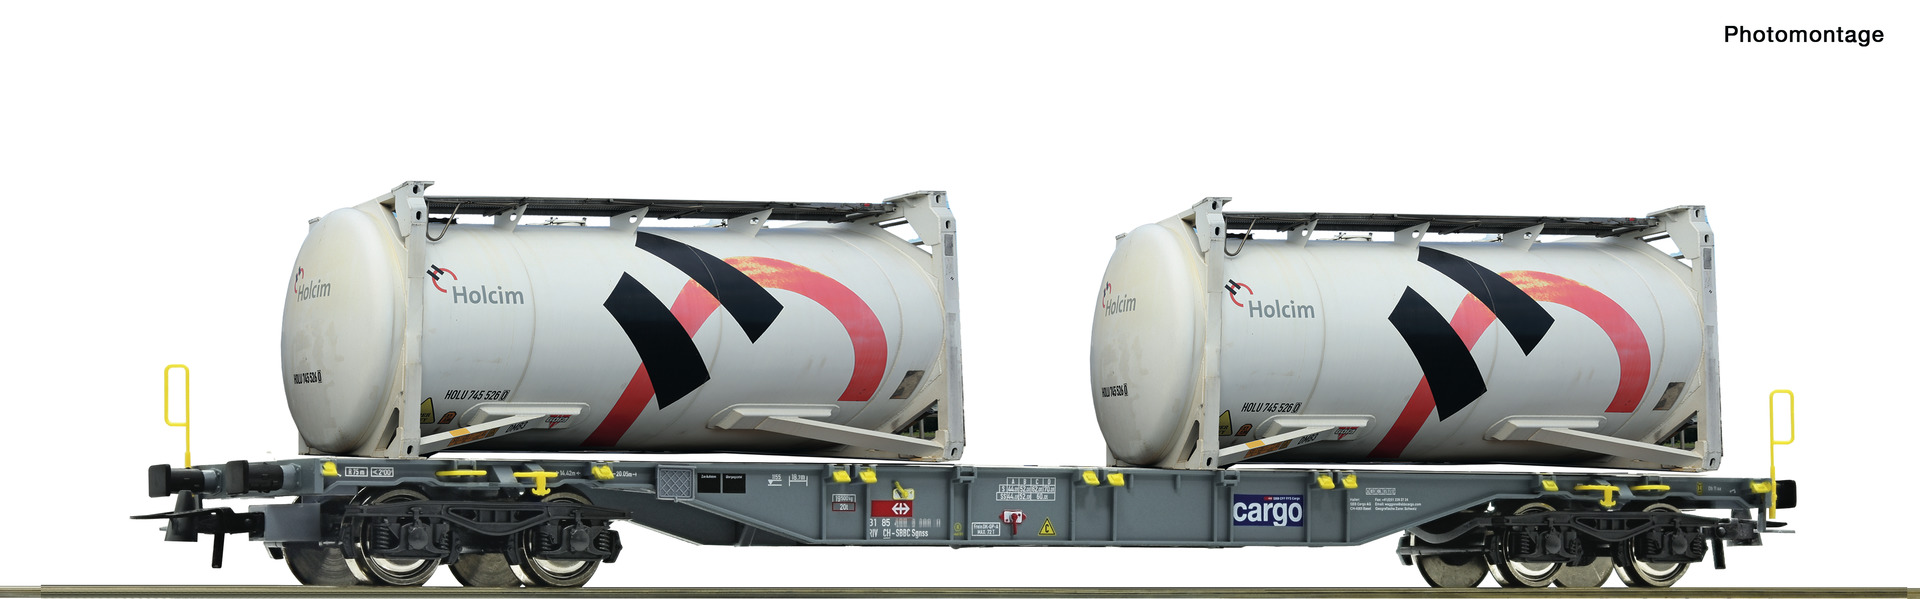 Roco 76943, SBB Containertragwagen, Sgnss, inkl. 2x HOLCIM-Tankcontainer, Ep. VI